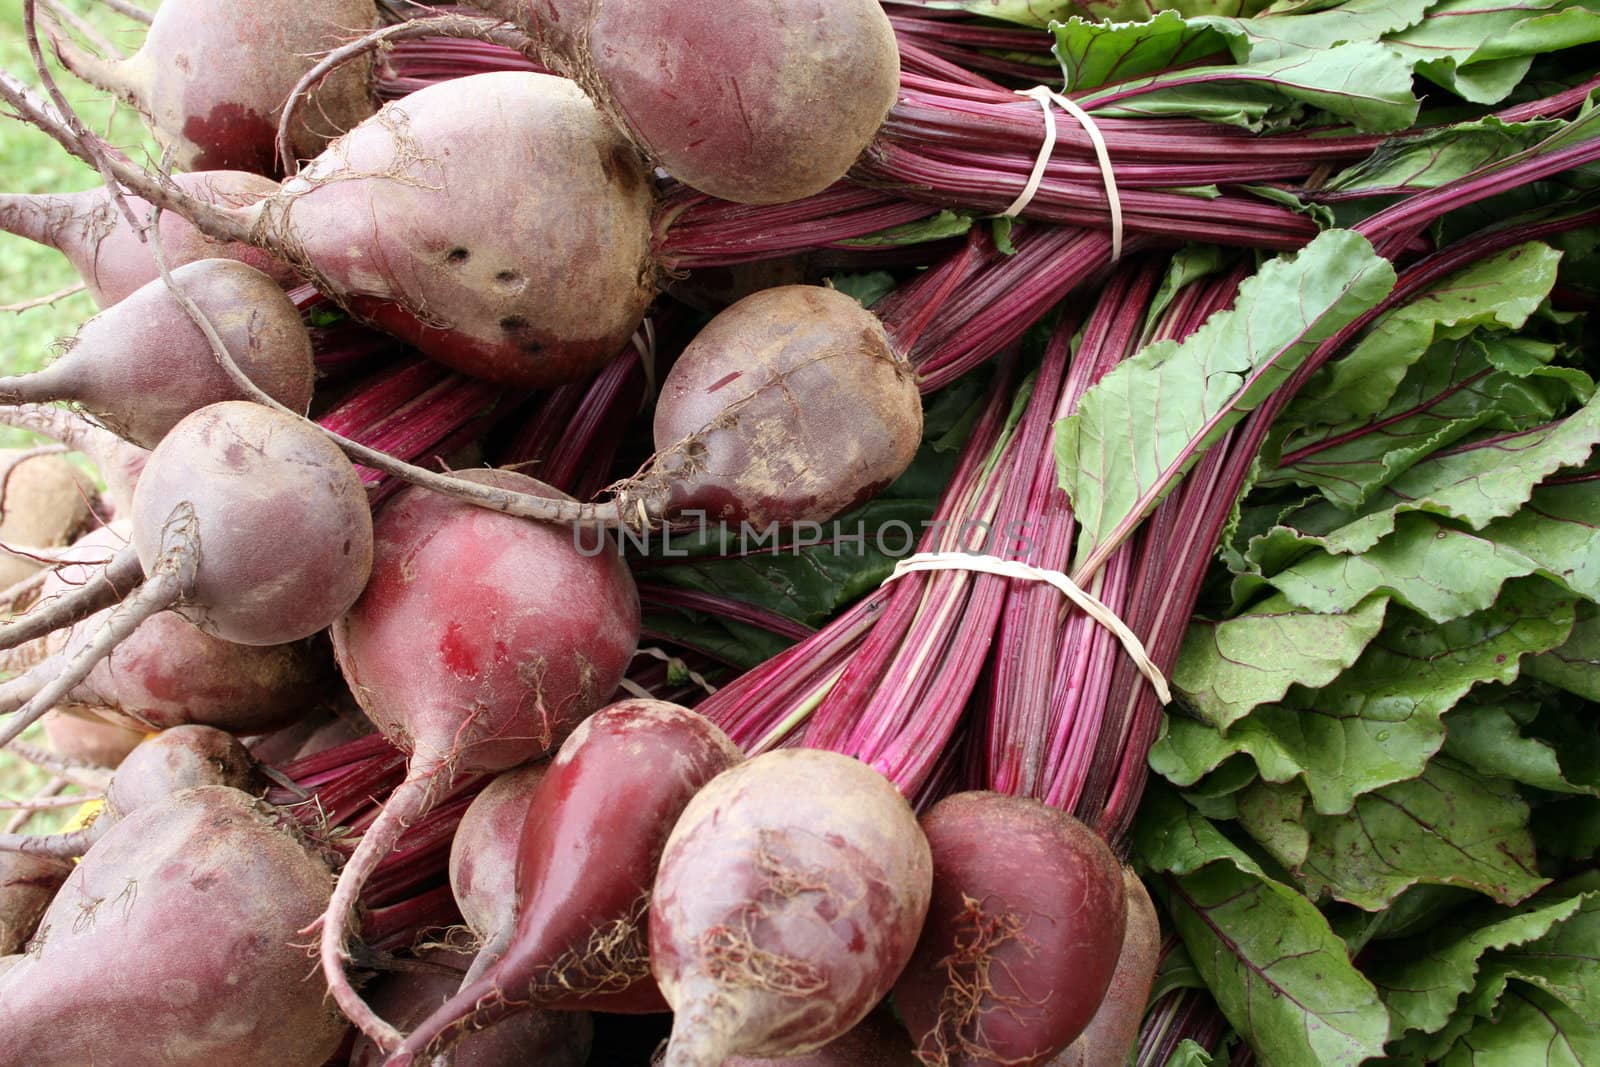 Freshly picked organic beets with greens, found at a farmers' market